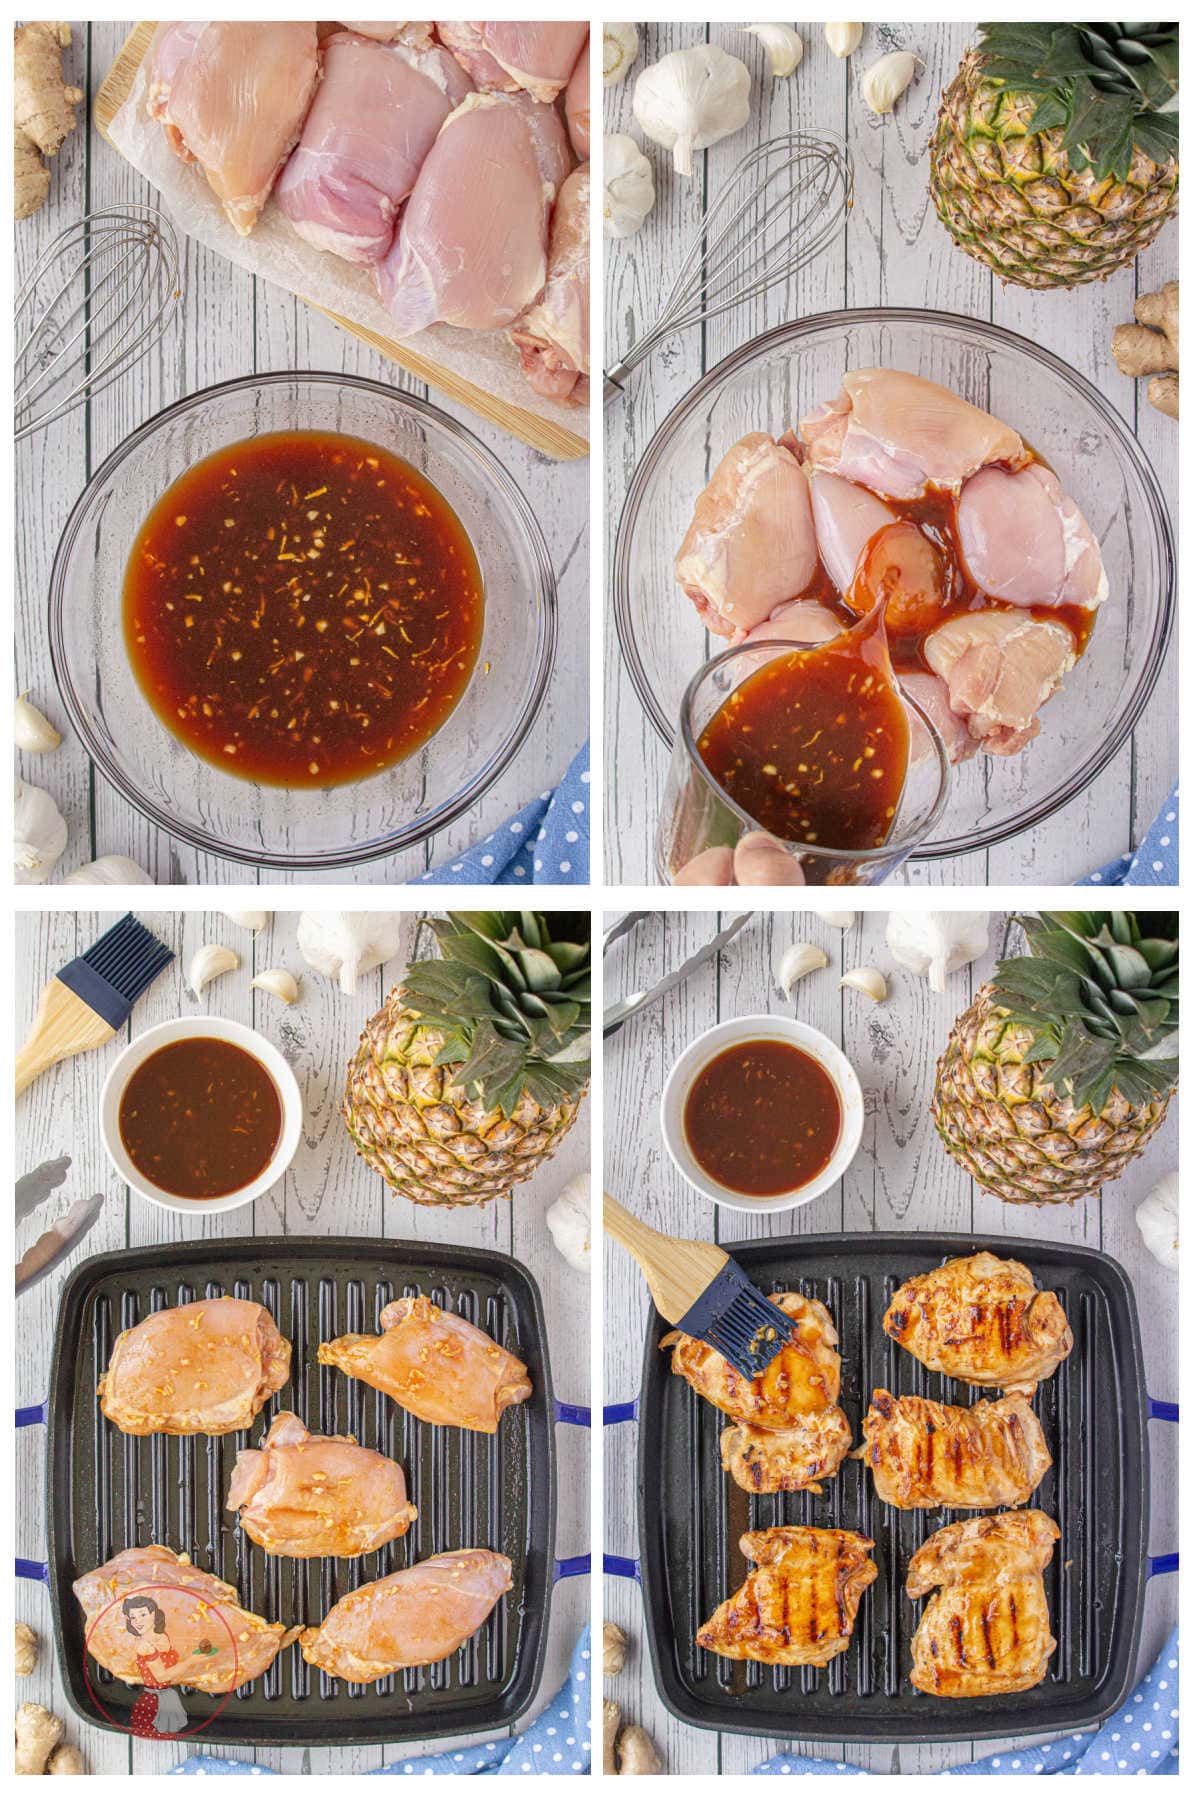 Step by step images showing how to make huli huli chicken.